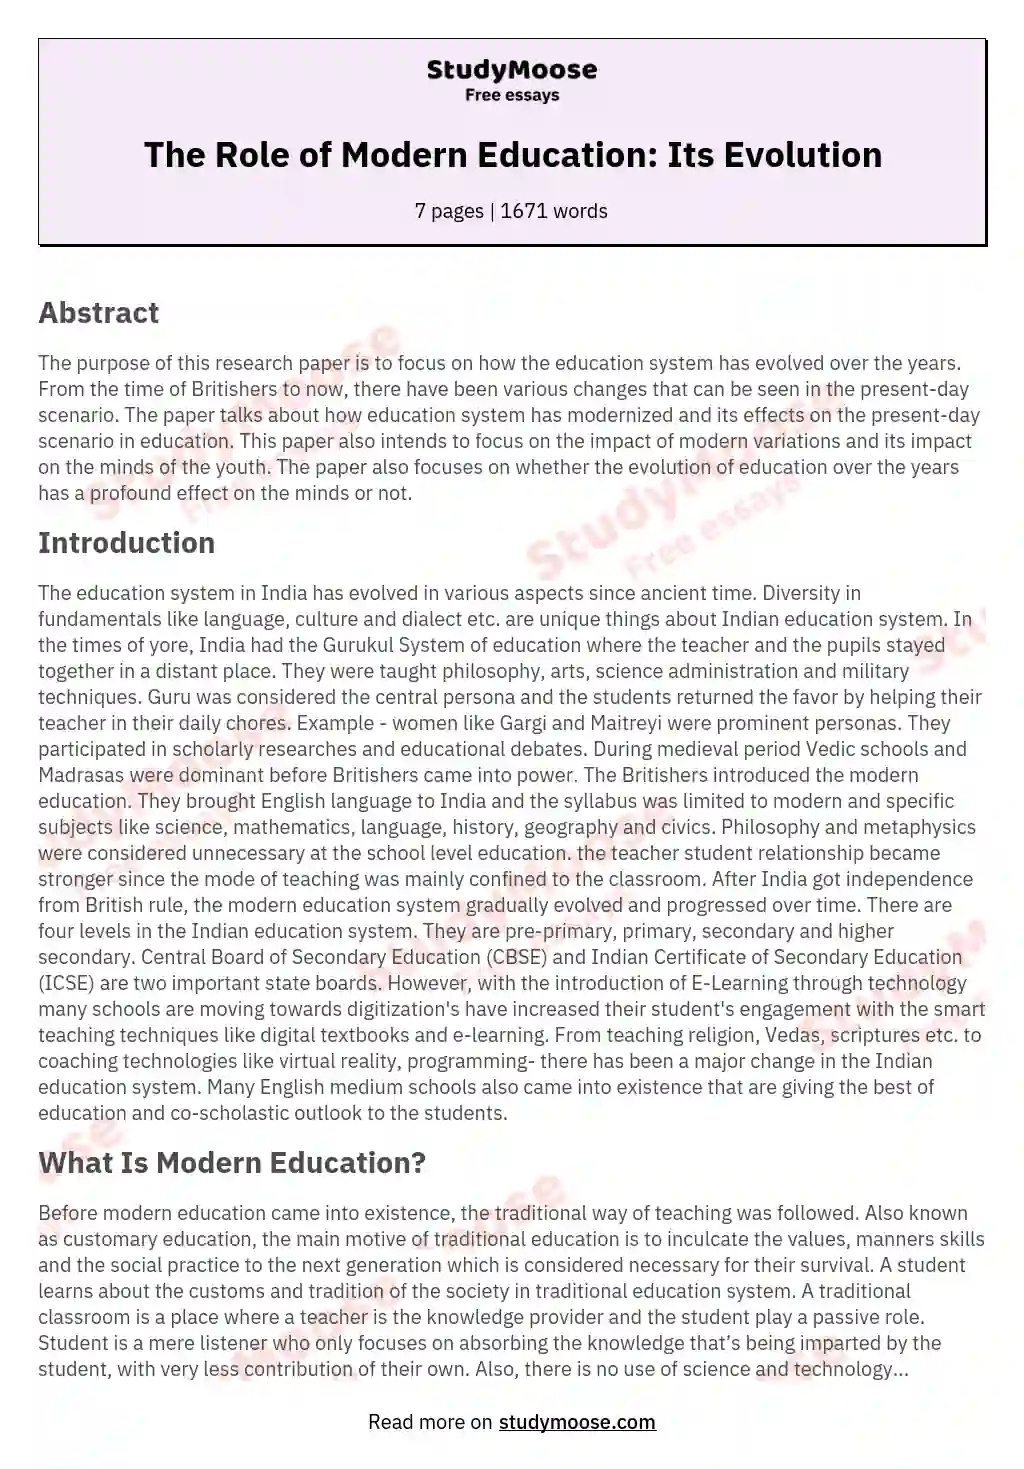 essay on ancient education and modern education